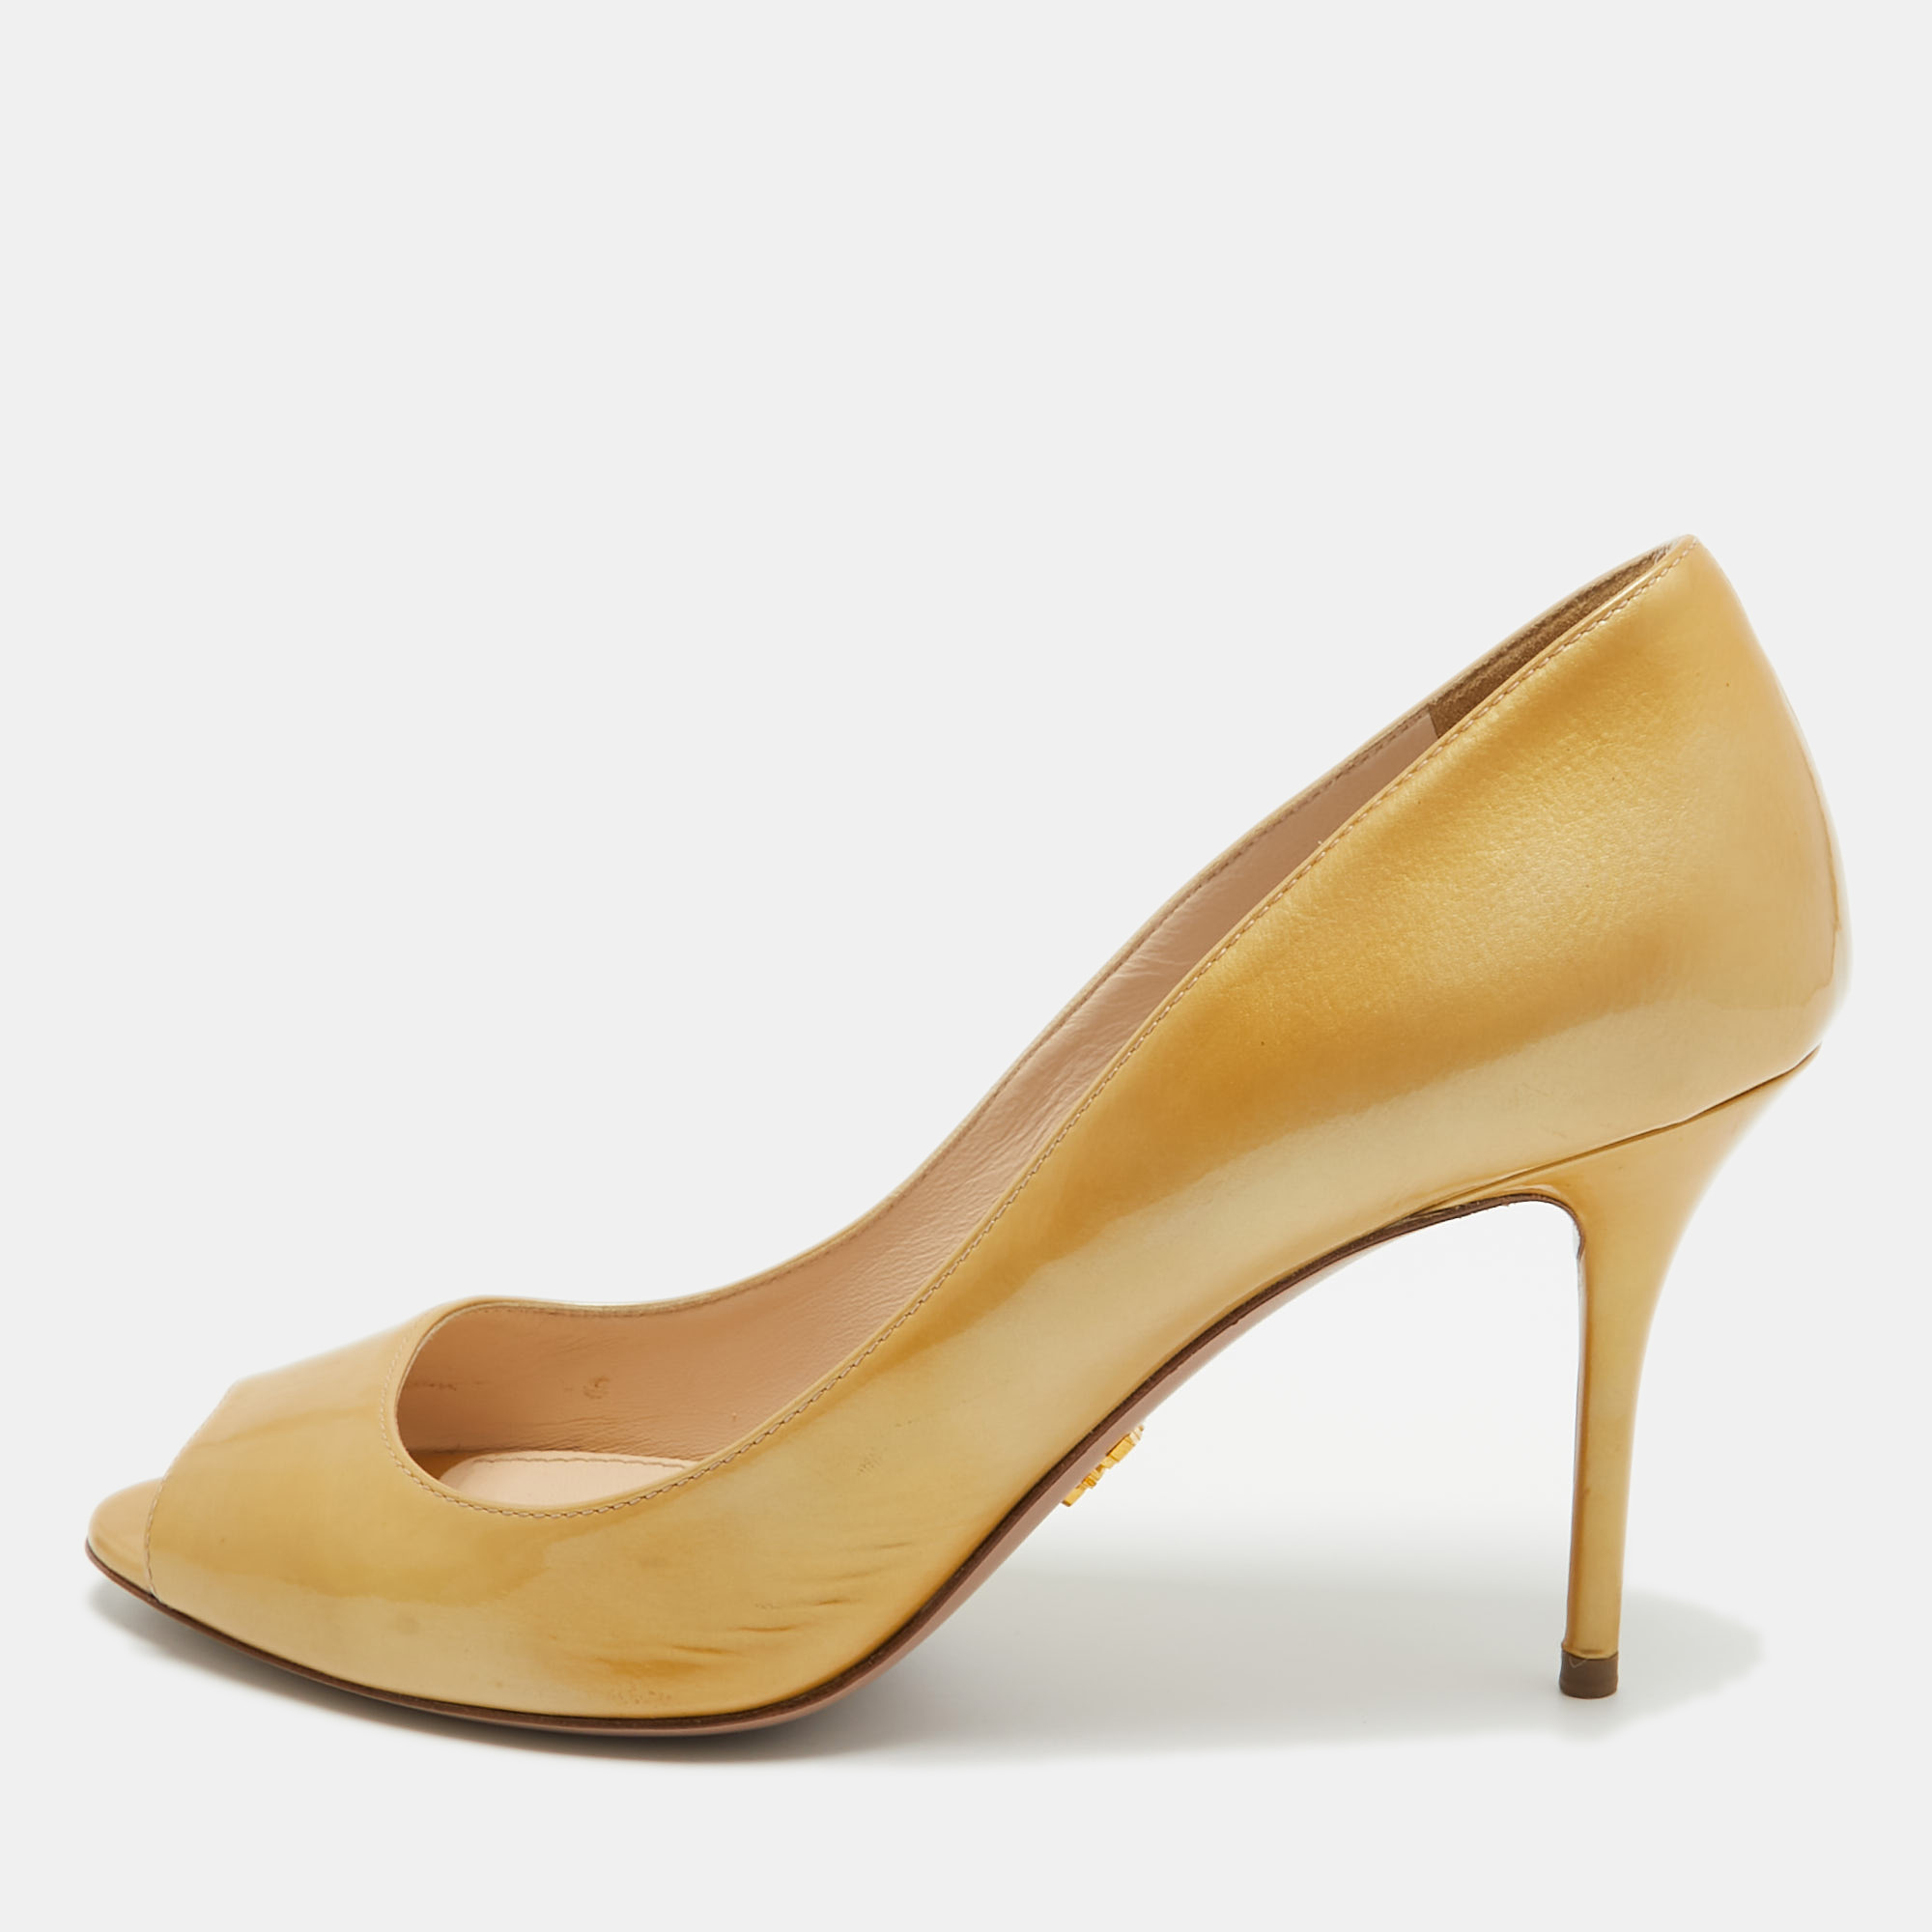 Pre-owned Prada Gold Patent Leather Peep Toe Pumps Size 40.5